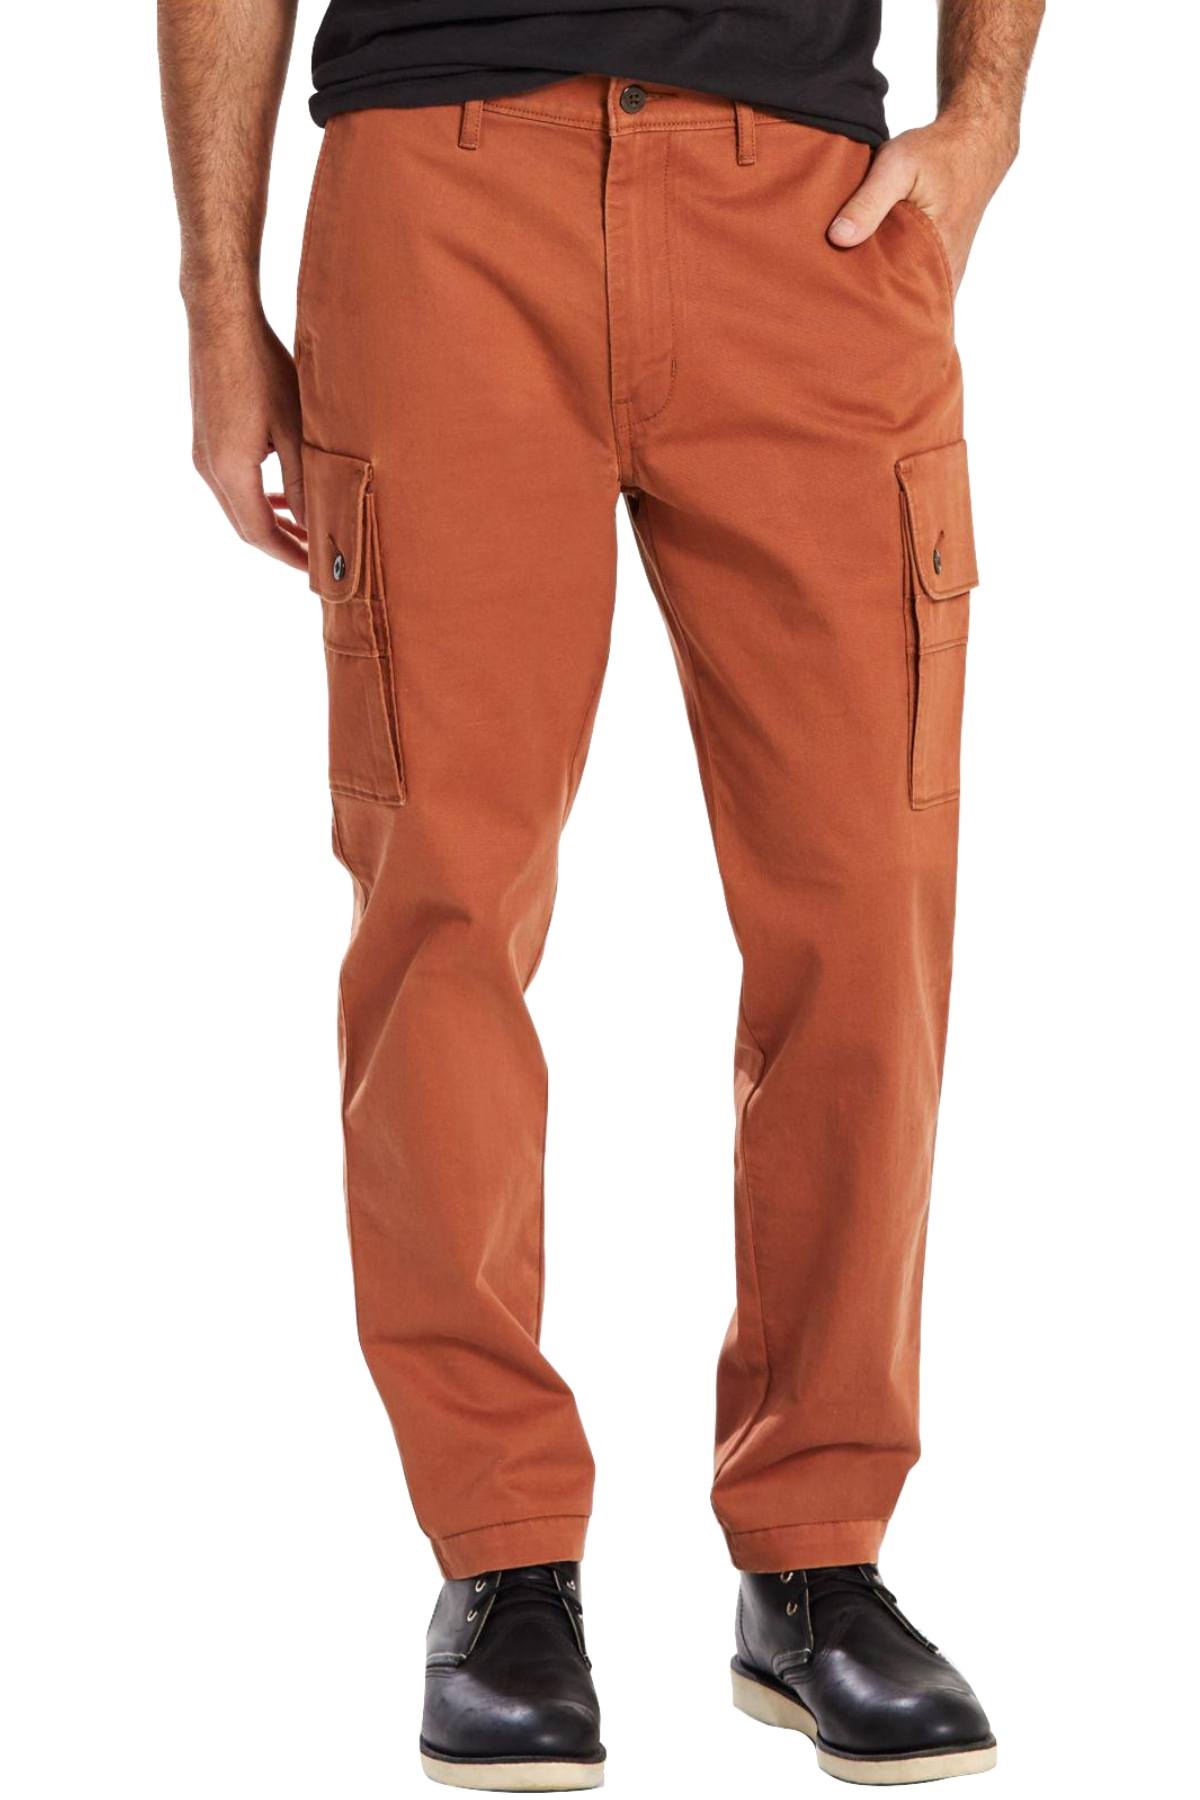 Levi's Rust-Copper Slim-Fit Tapered Utility Cargo Pant – CheapUndies